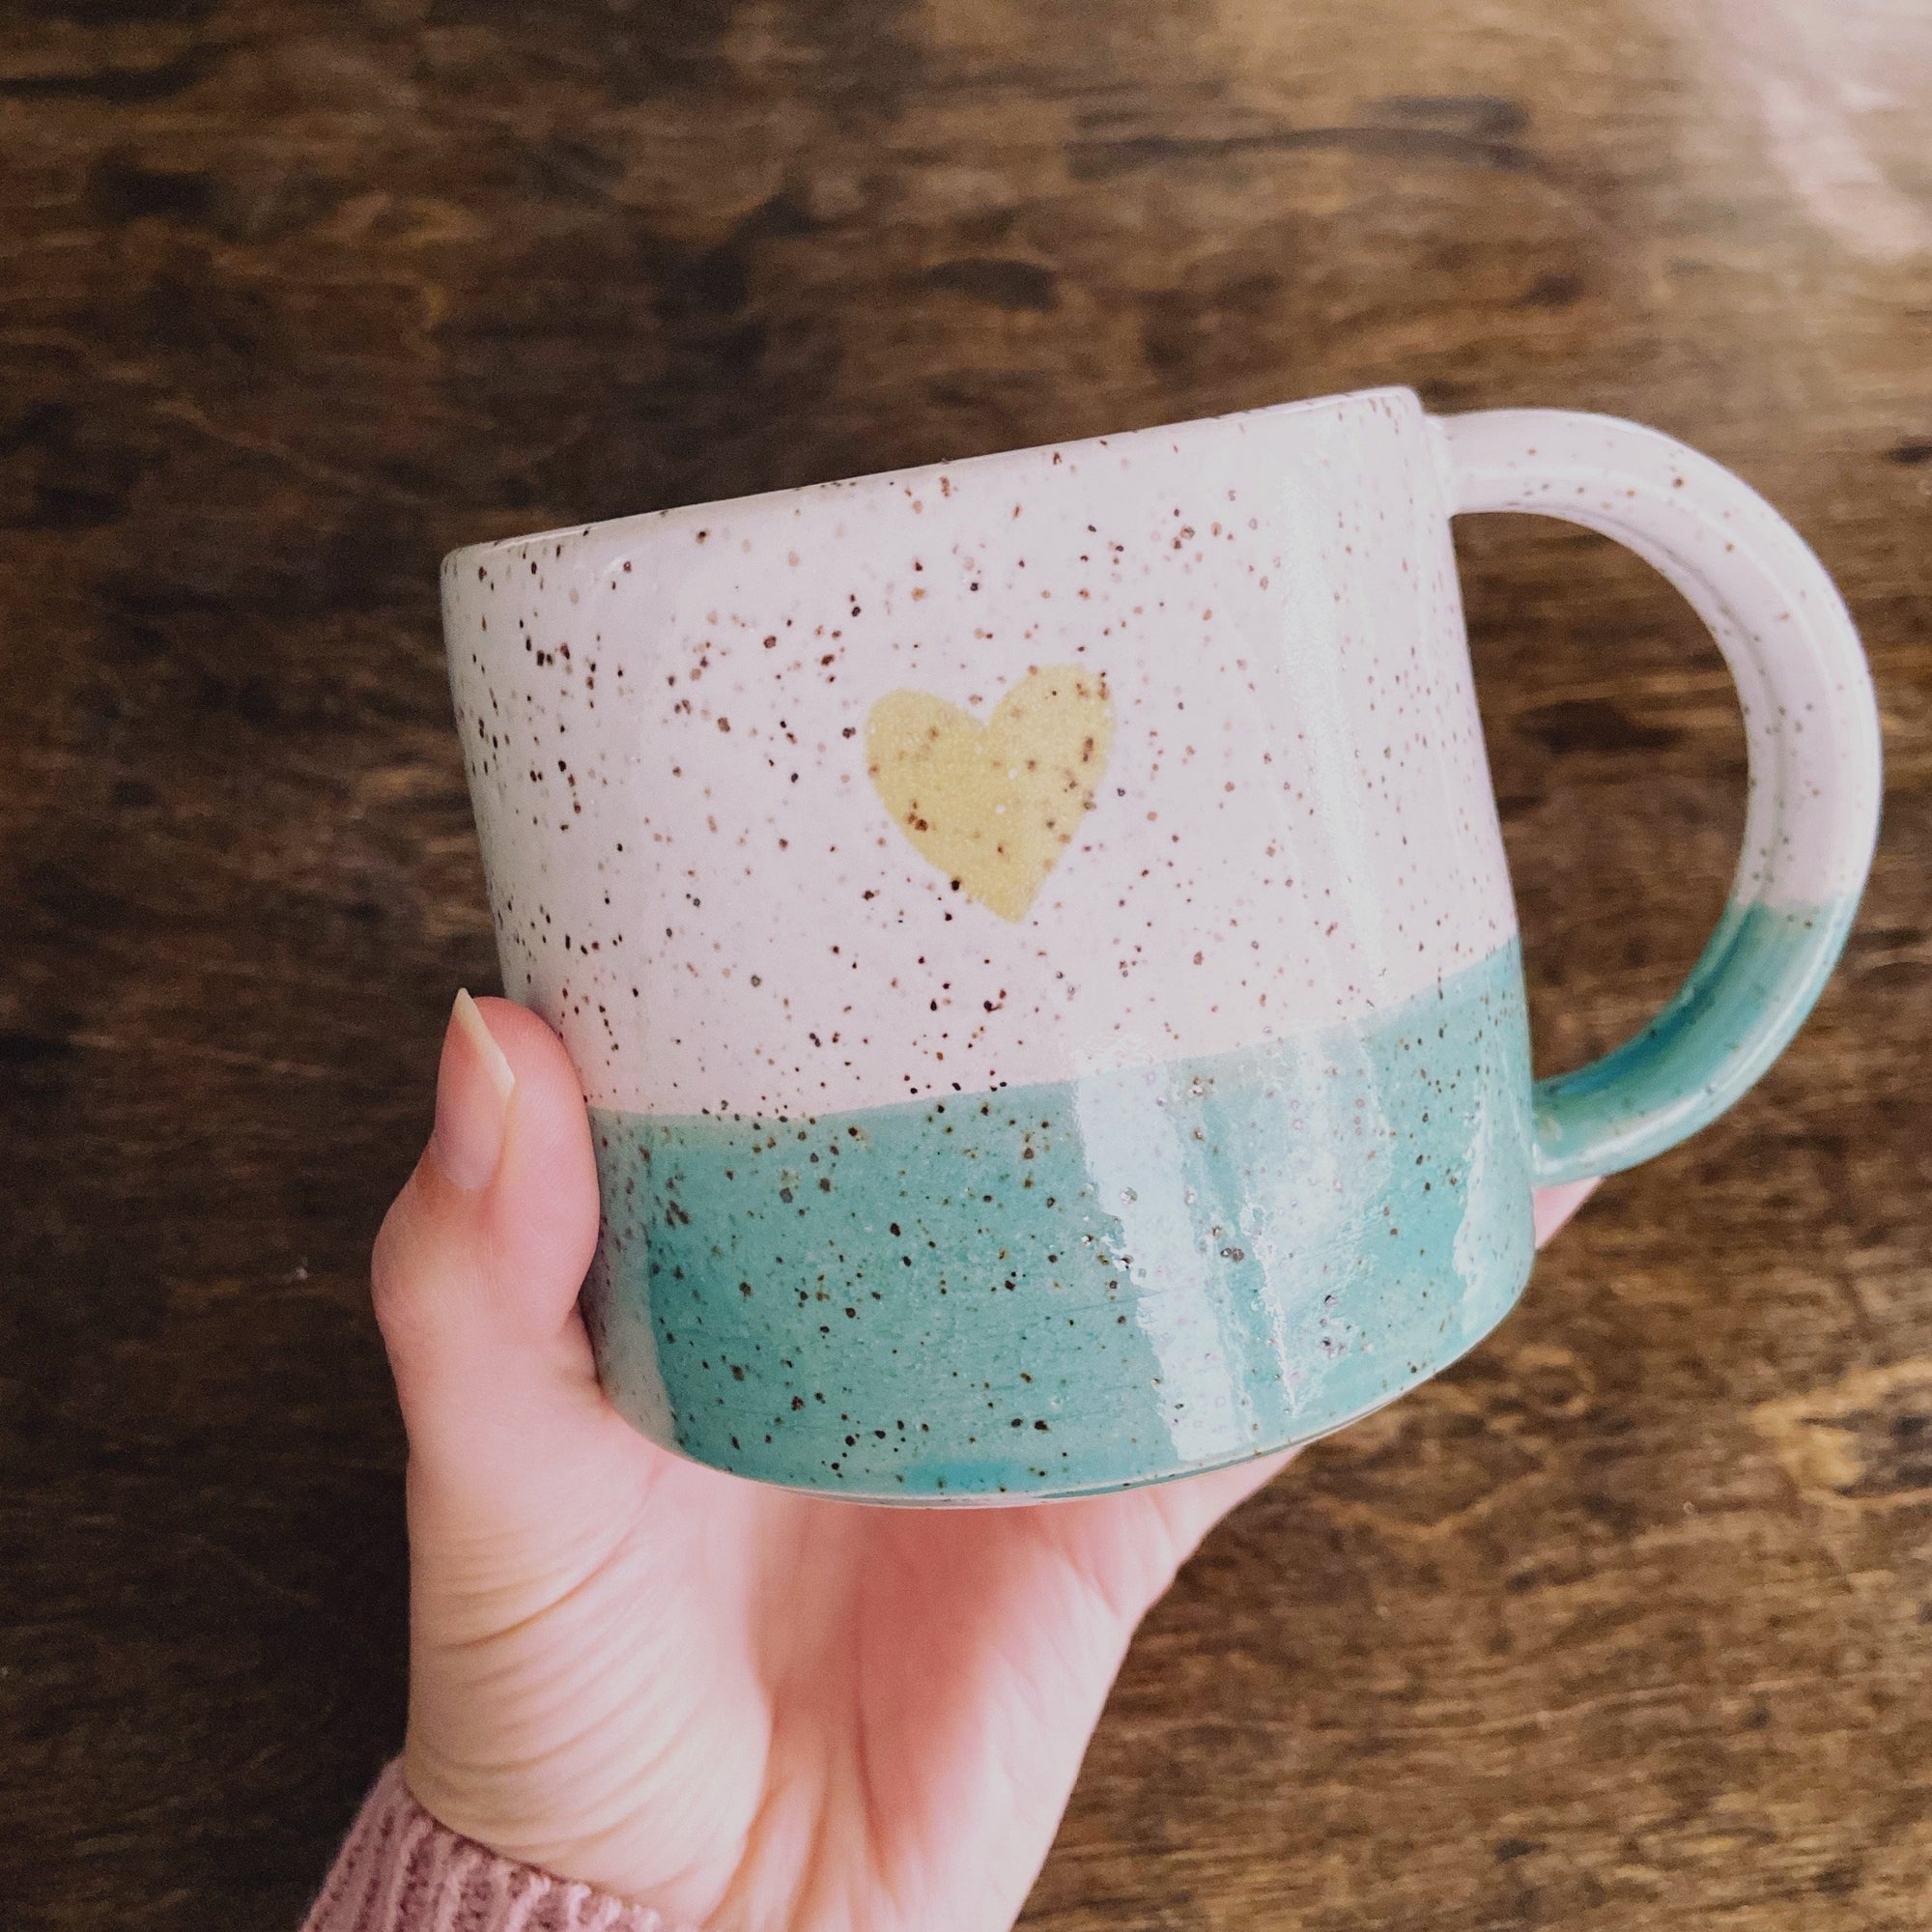 Handmade Ceramic Speckled Mug with teal bottom and yellow heart in the center of the mug, made by Heart and Hope Inc from Calgary Canada